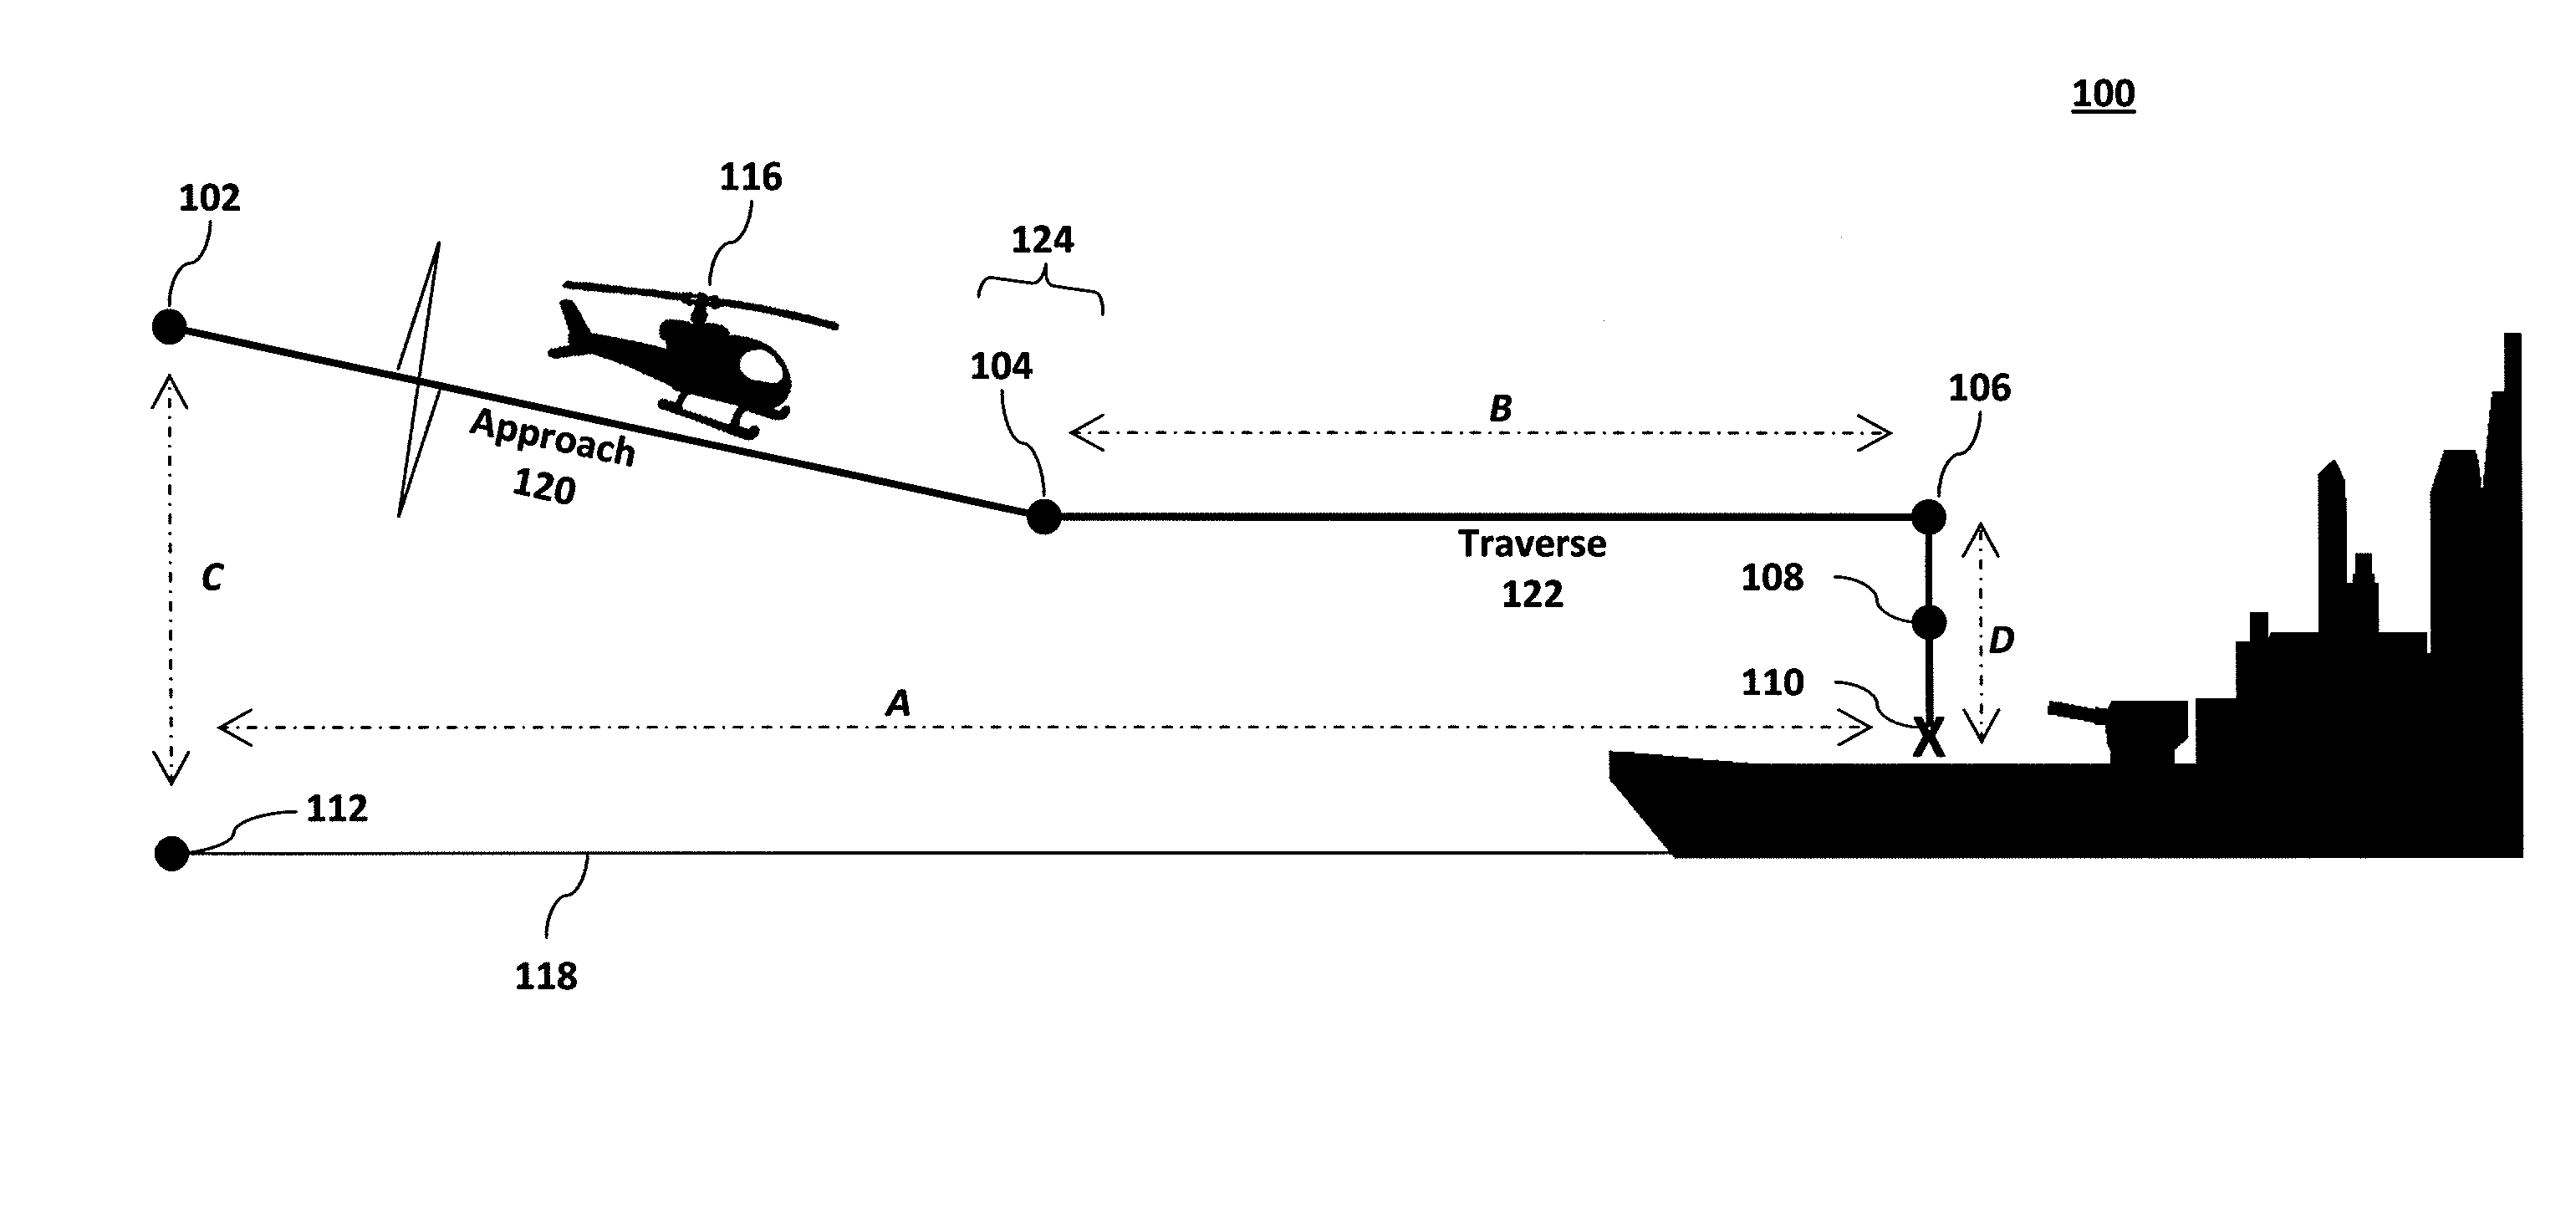 System and methods for automatically landing aircraft